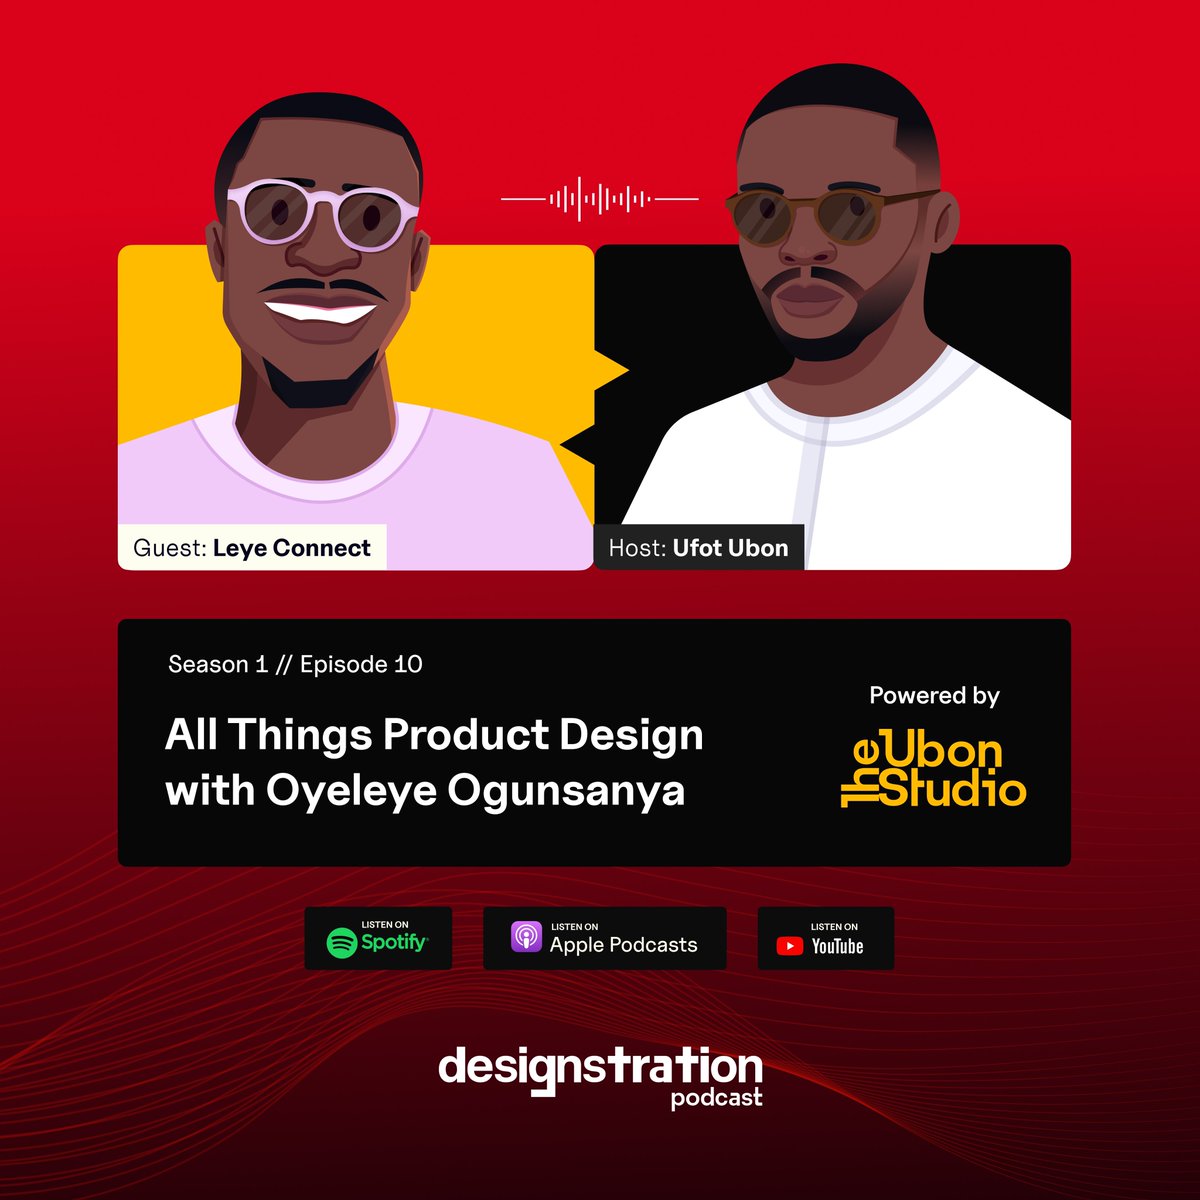 New Episode Out! 🎉 Come join @leyeconnect on this week’s episode as he talks about All things Product Design with @ufotubon Listen on @spotify: open.spotify.com/episode/6KUhXY… Listen on @ApplePodcasts: podcasts.apple.com/us/podcast/des… #DesignstrationPodcast